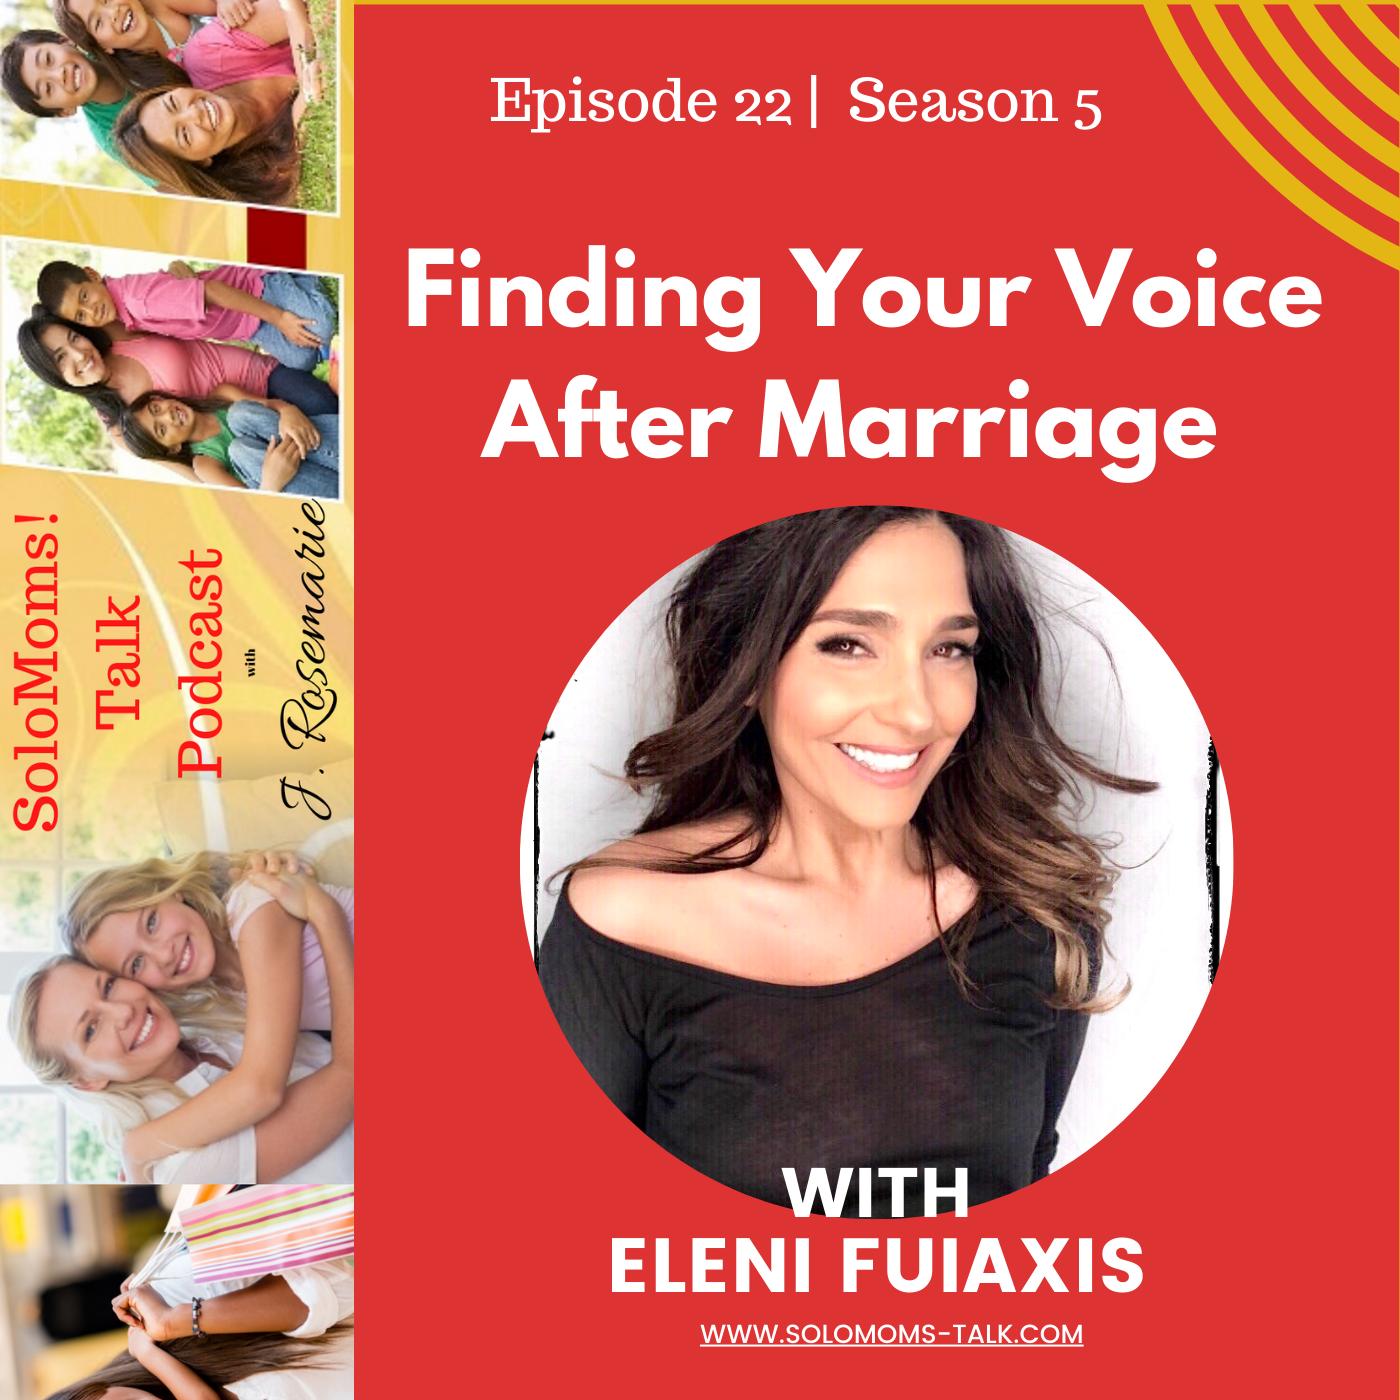 Finding Your Voice After Marriage w/Eleni Fuiaxis